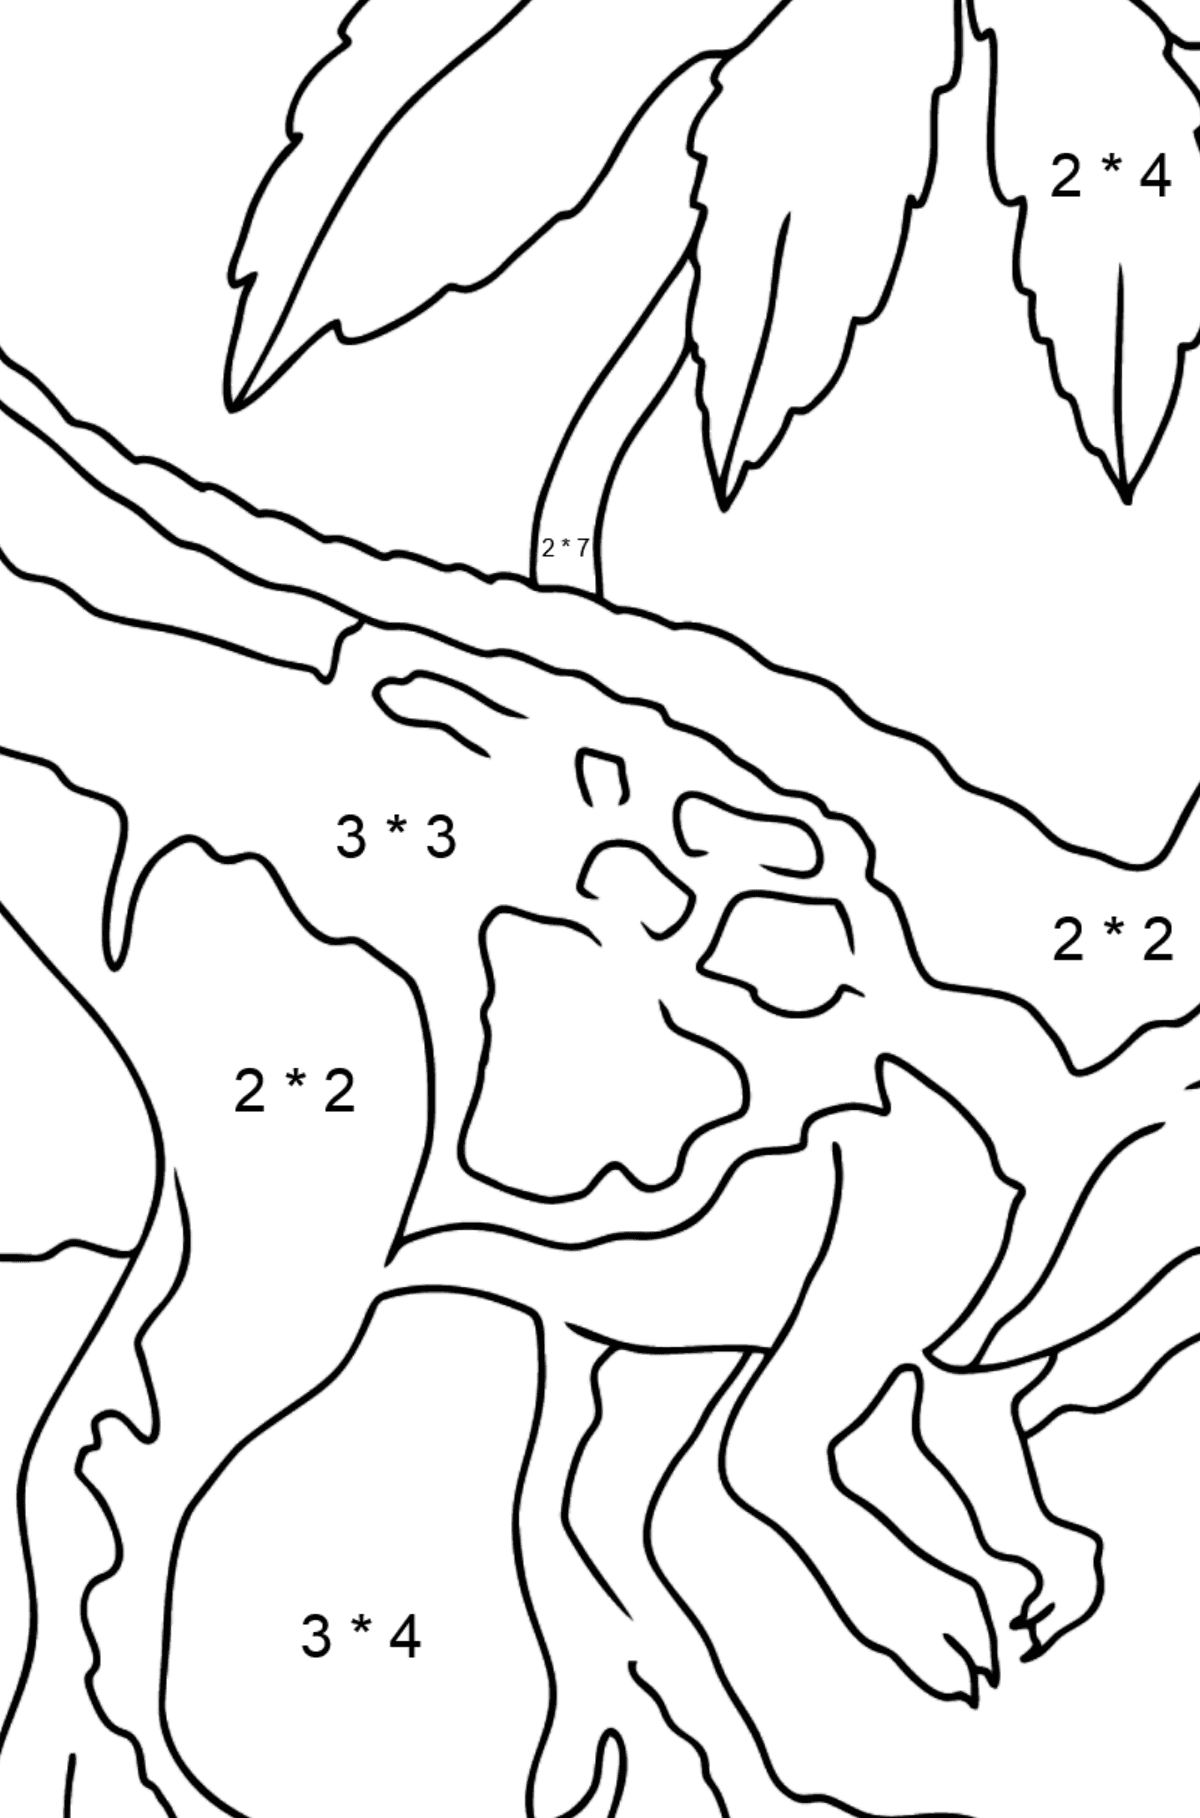 Coloring Page - Tyrannosaurus - The Best Hunter Among Dinosaurs - Math Coloring - Multiplication for Kids